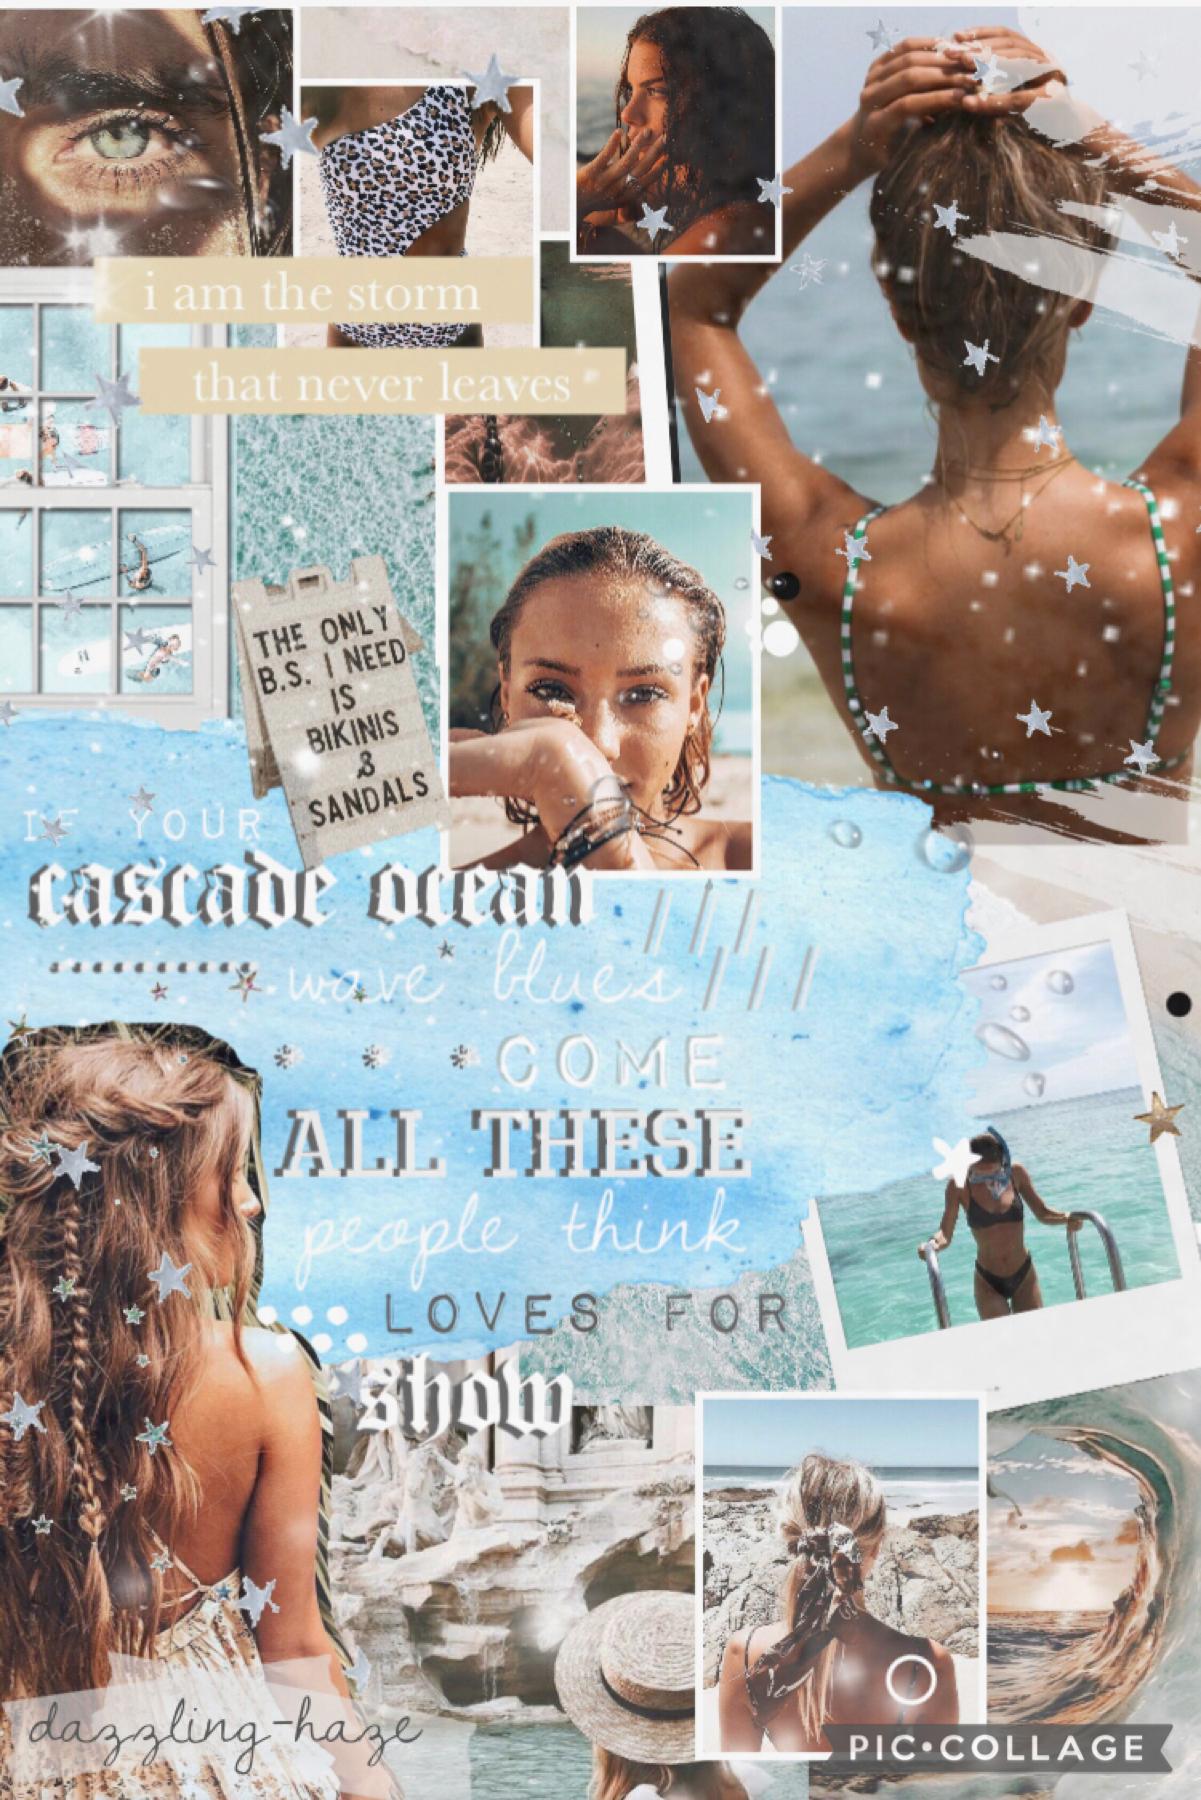 tap here!
Hey everyone!!! I’m Mya! This is my first post 🤗 I’ve been making collages on here for a bit but I’ve never posted before! I hope you guys like this and if you want to be friends lmk! 🌊